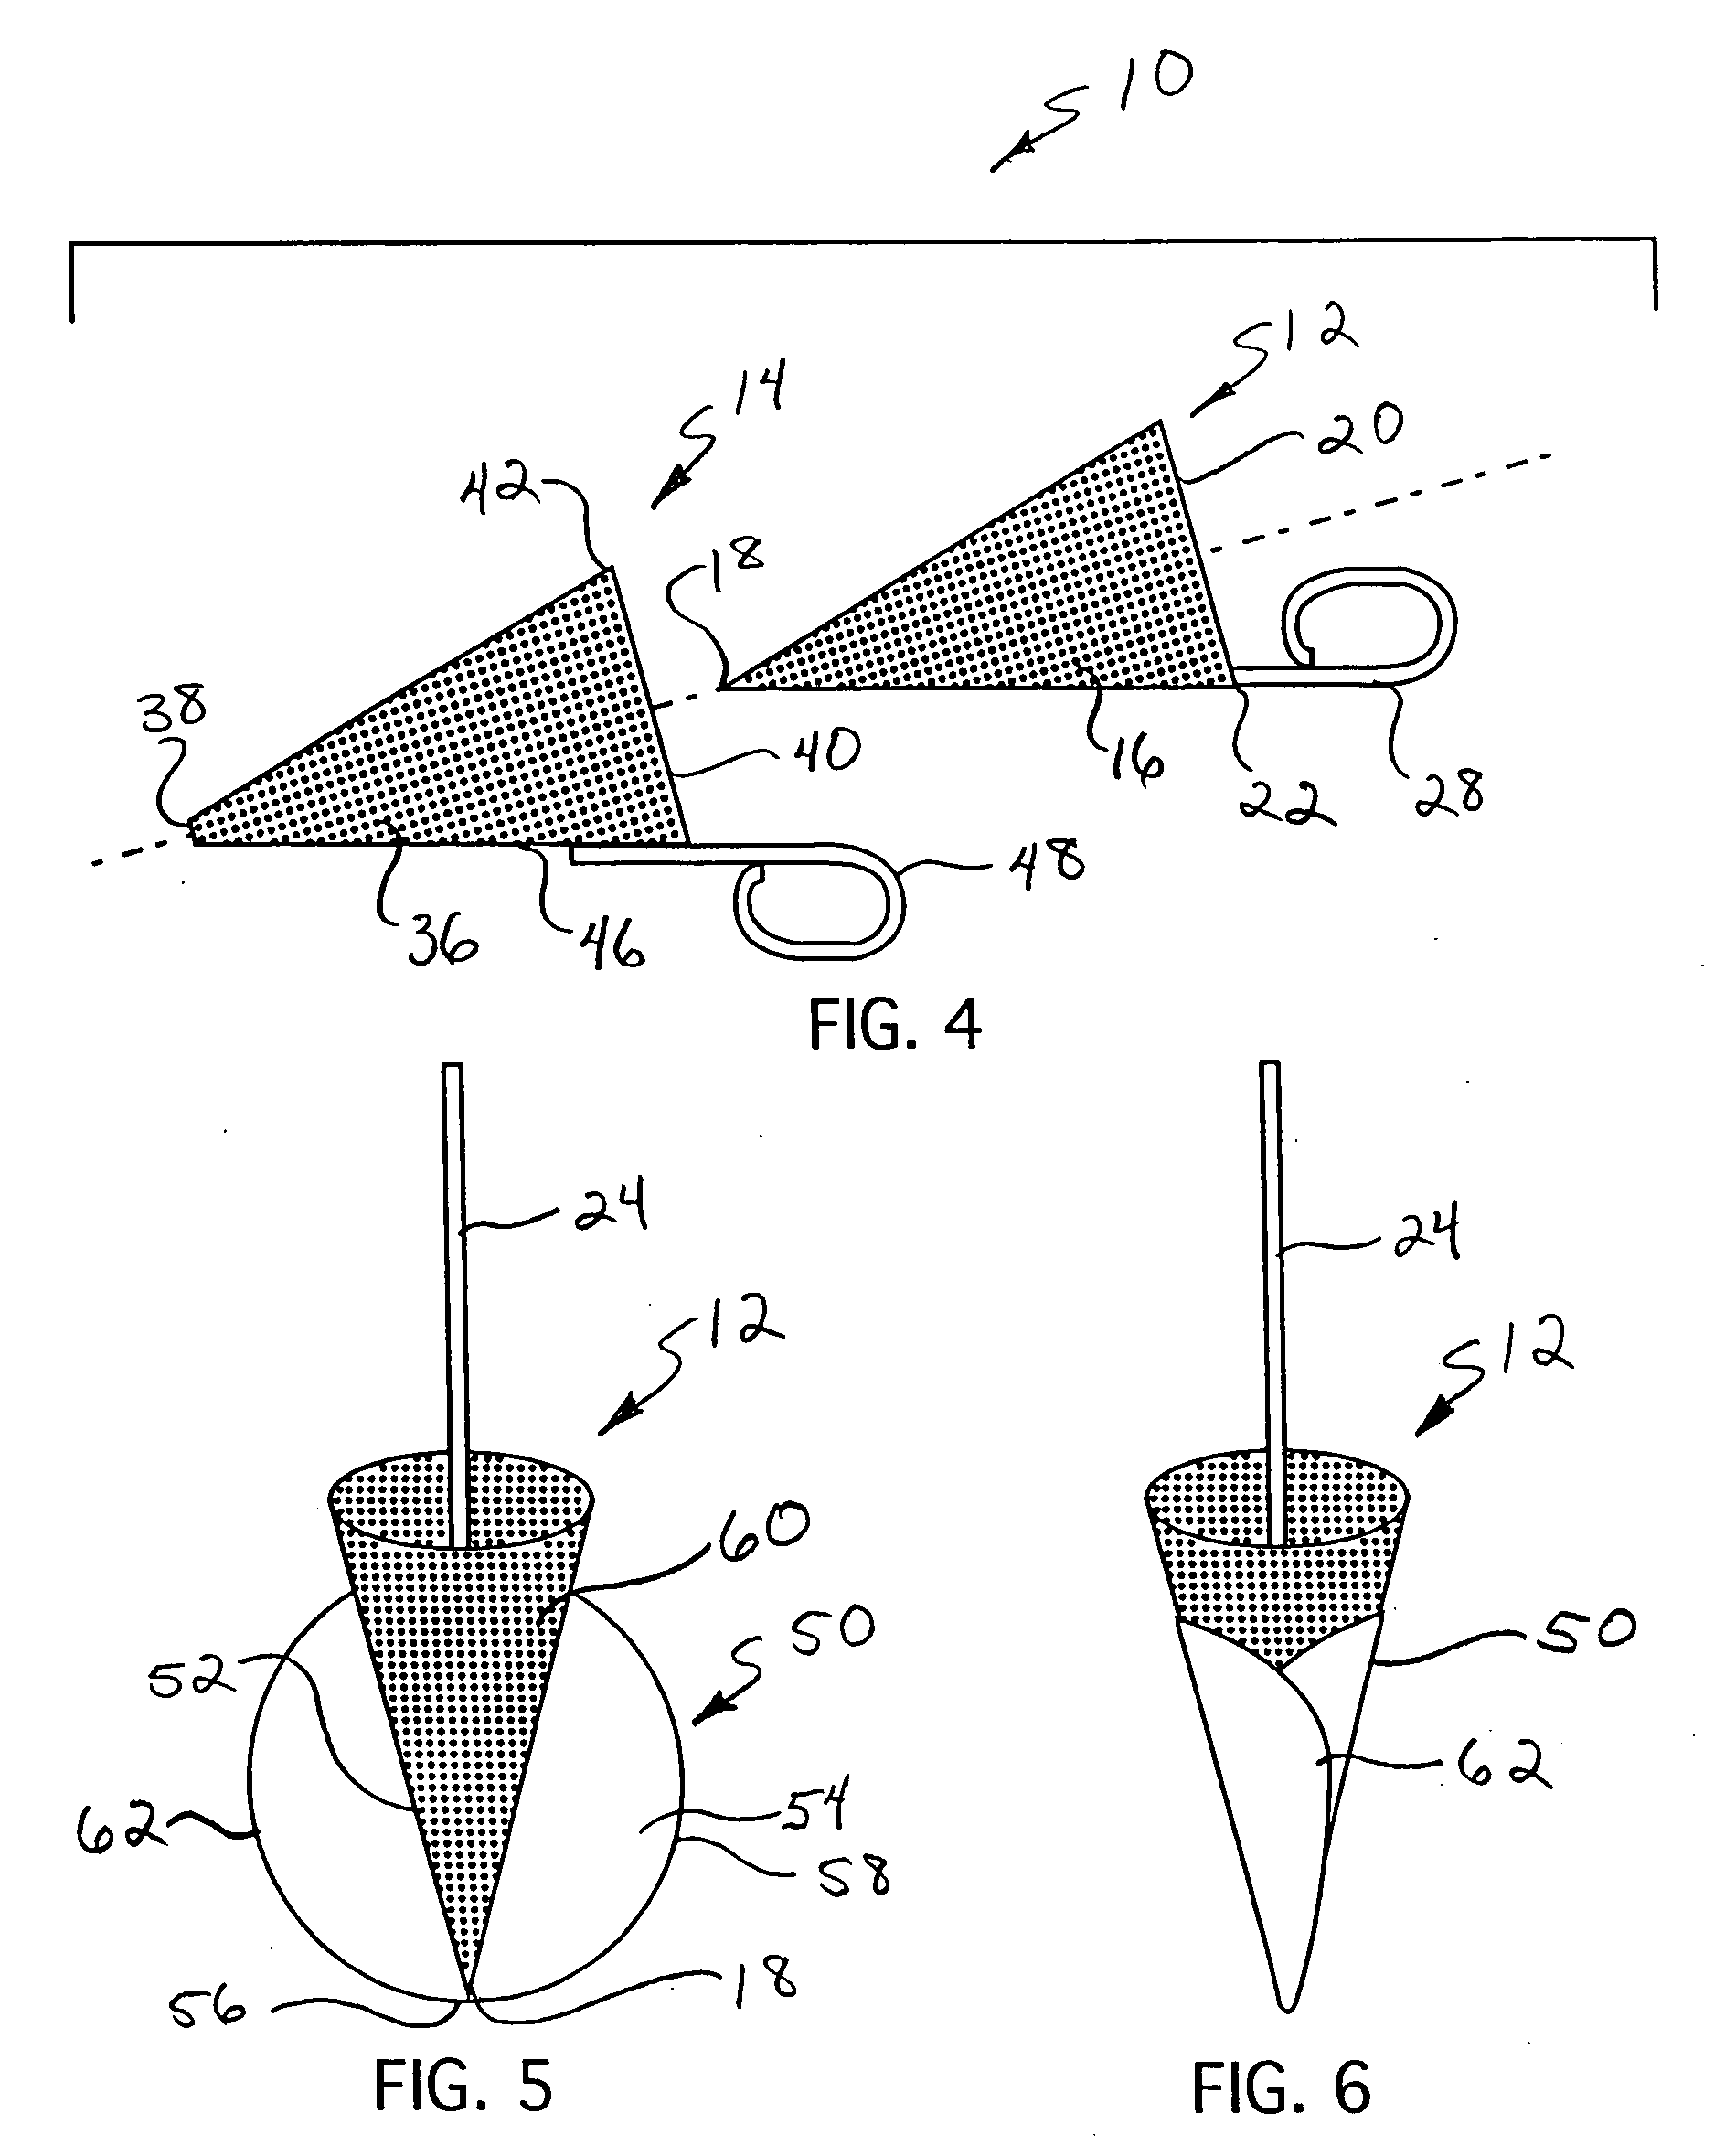 Cone-shaped tortilla molds and method of cooking conical tortilla shells